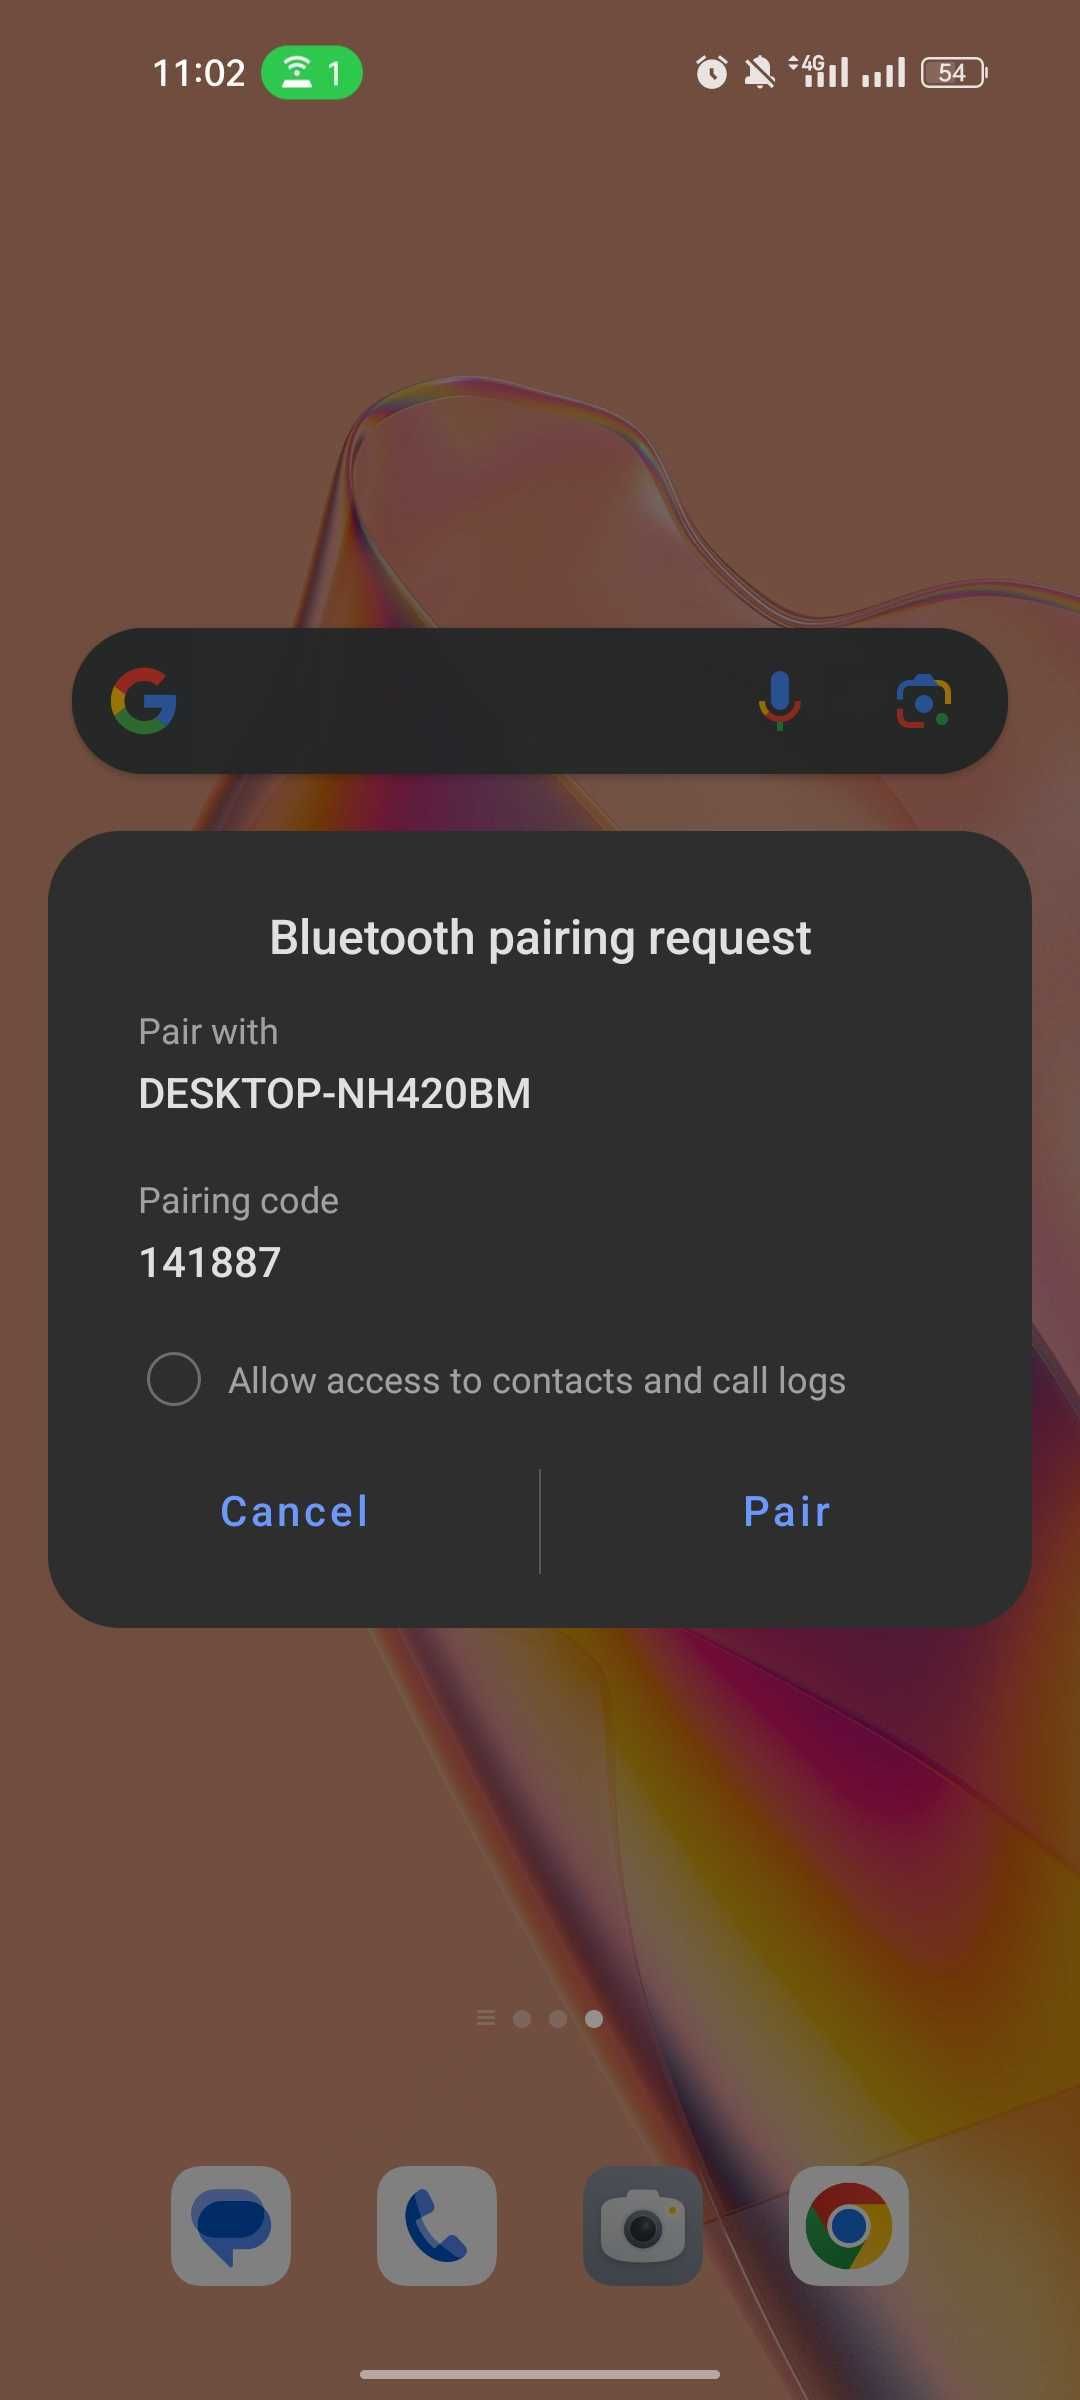 Pair bluetooth devices in Android